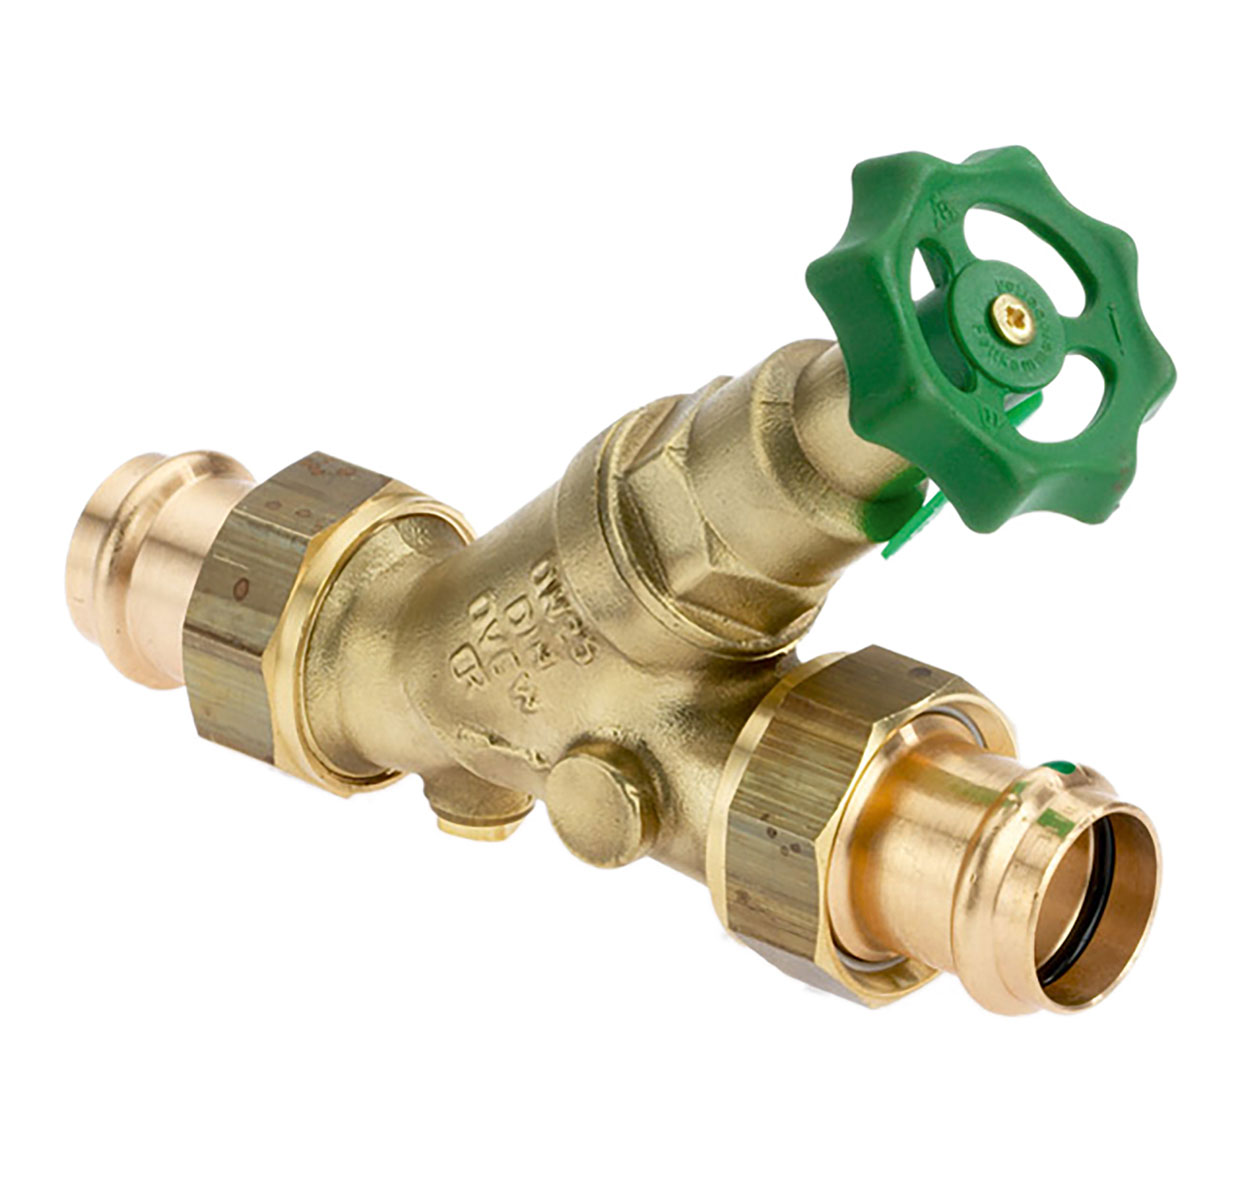 1630540 - CR-Brass Combined Free-flow and Backflow-preventer Valve Viega Profipress, not-rising, without drain valve